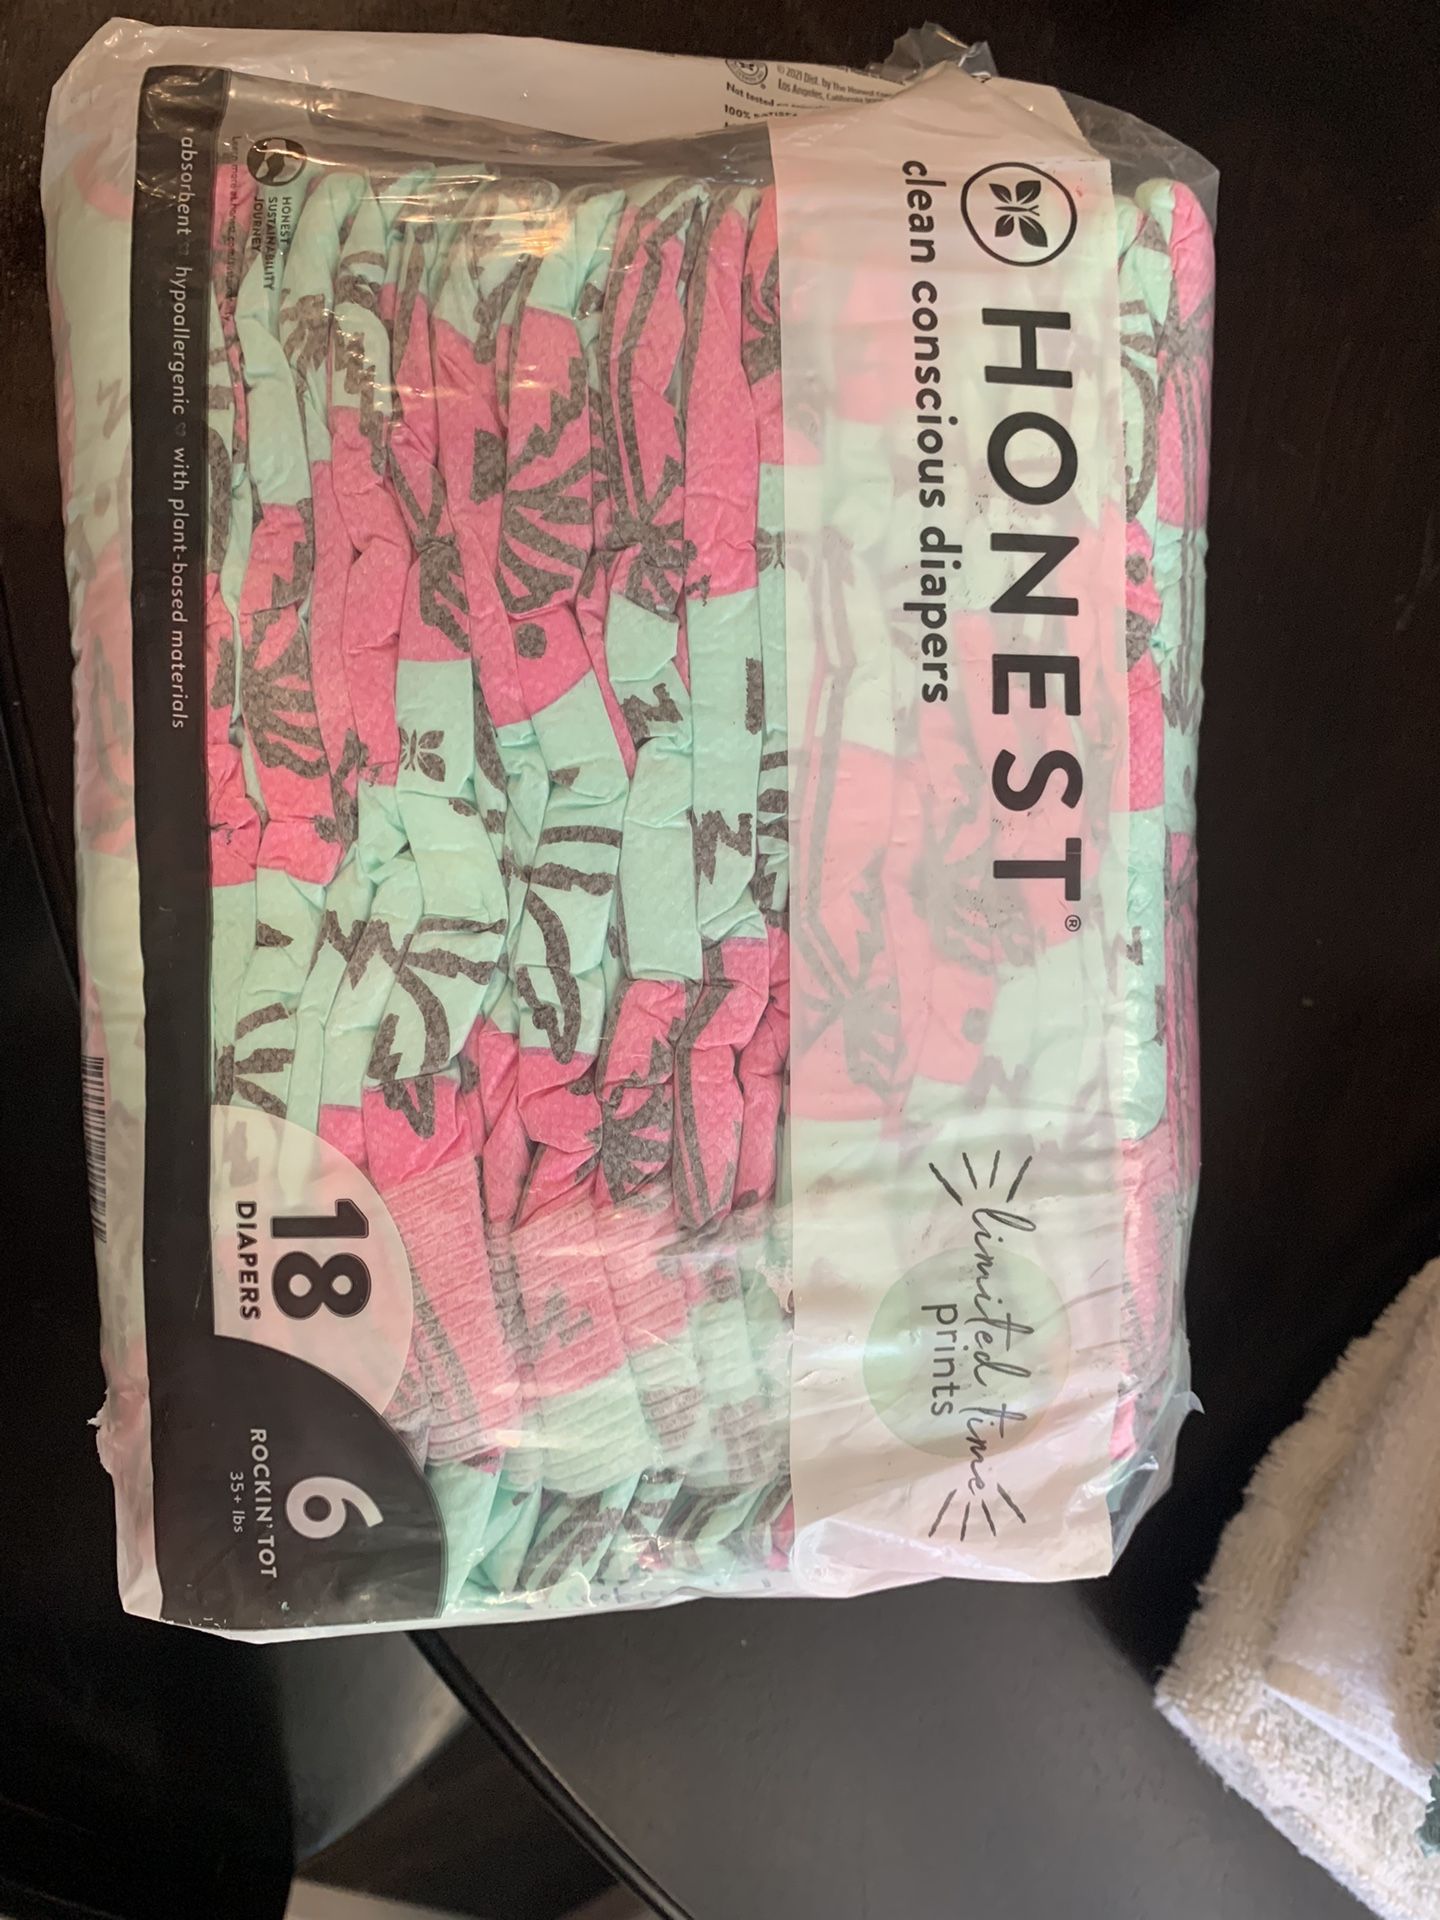 Honest Diapers Size 6 